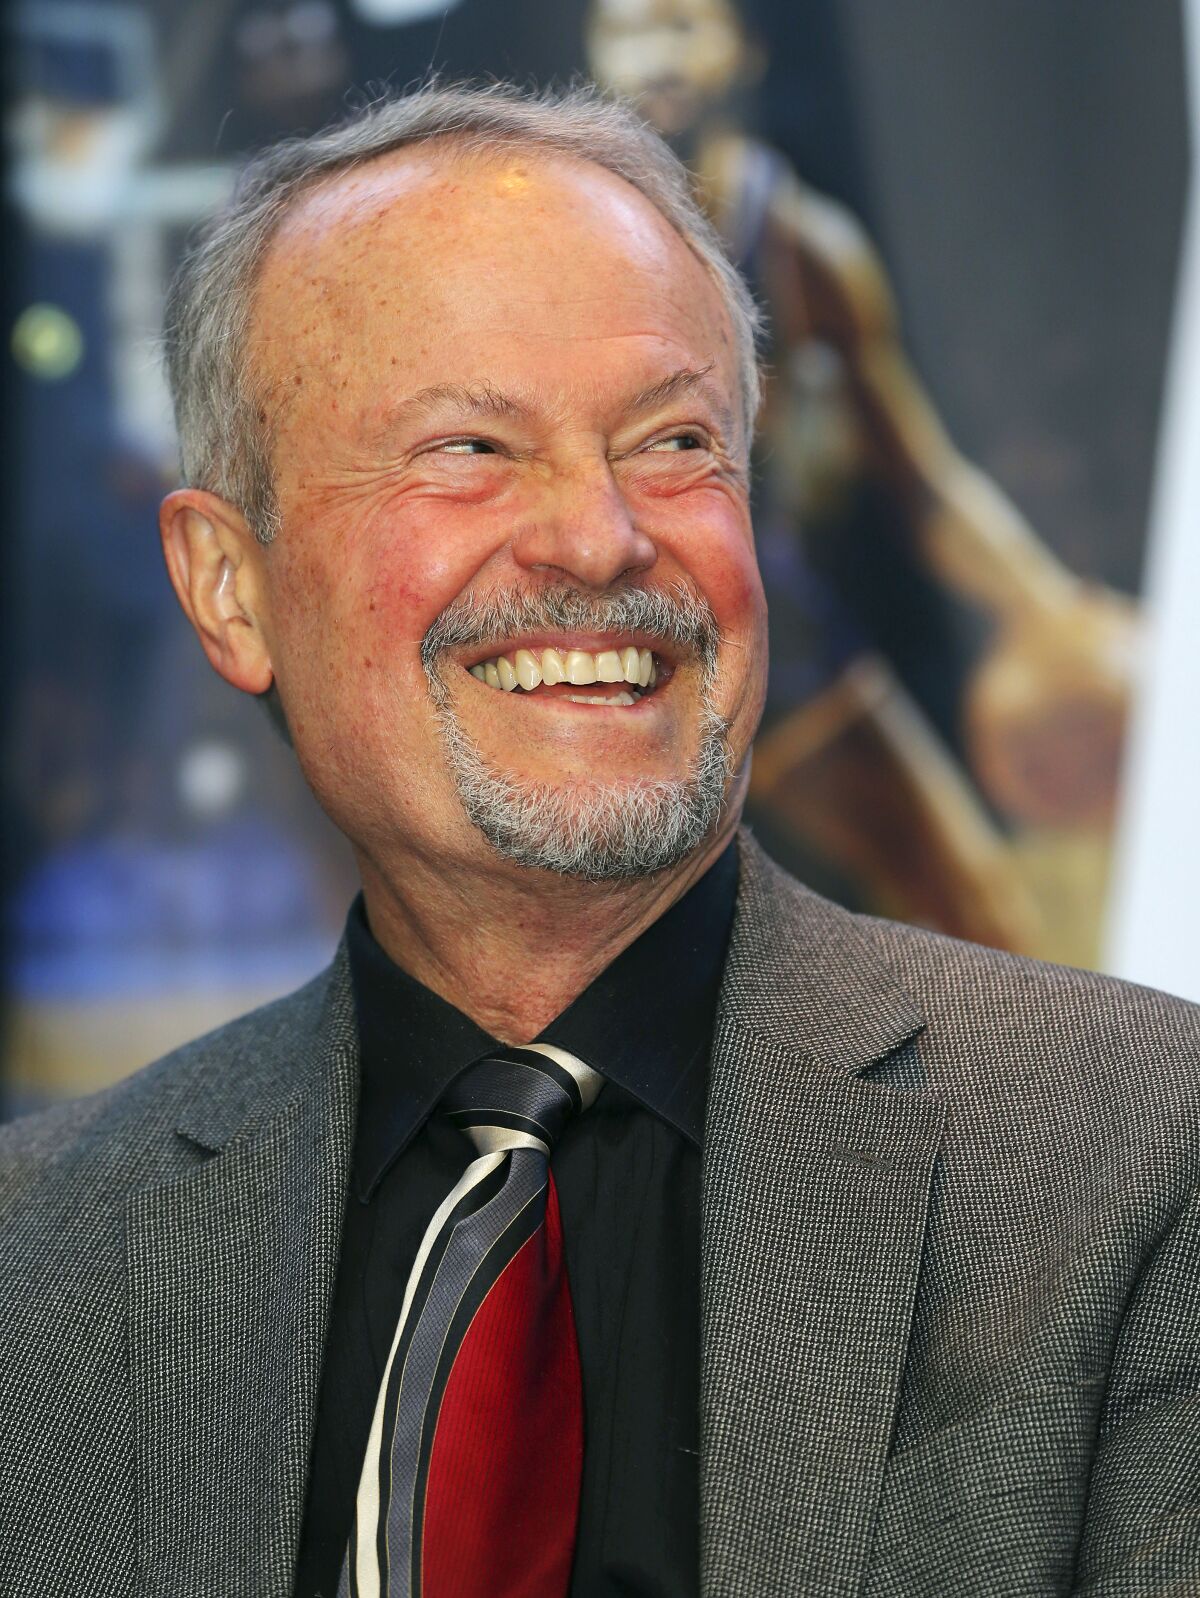 FILE - In this Feb. 13, 2015, file photo, Dr. Richard Lapchick speaks at The National Basketball Retired Players Association (NBRPA) Celebration of Black History Month at the Marriott Marquis as part of NBA All-Star 2015 in New York. Lapchick shares some of the backlash his family felt that was directed at his father for signing the first Black player to an NBA contract. (Adam Hunger/AP Images for NBRPA, File)